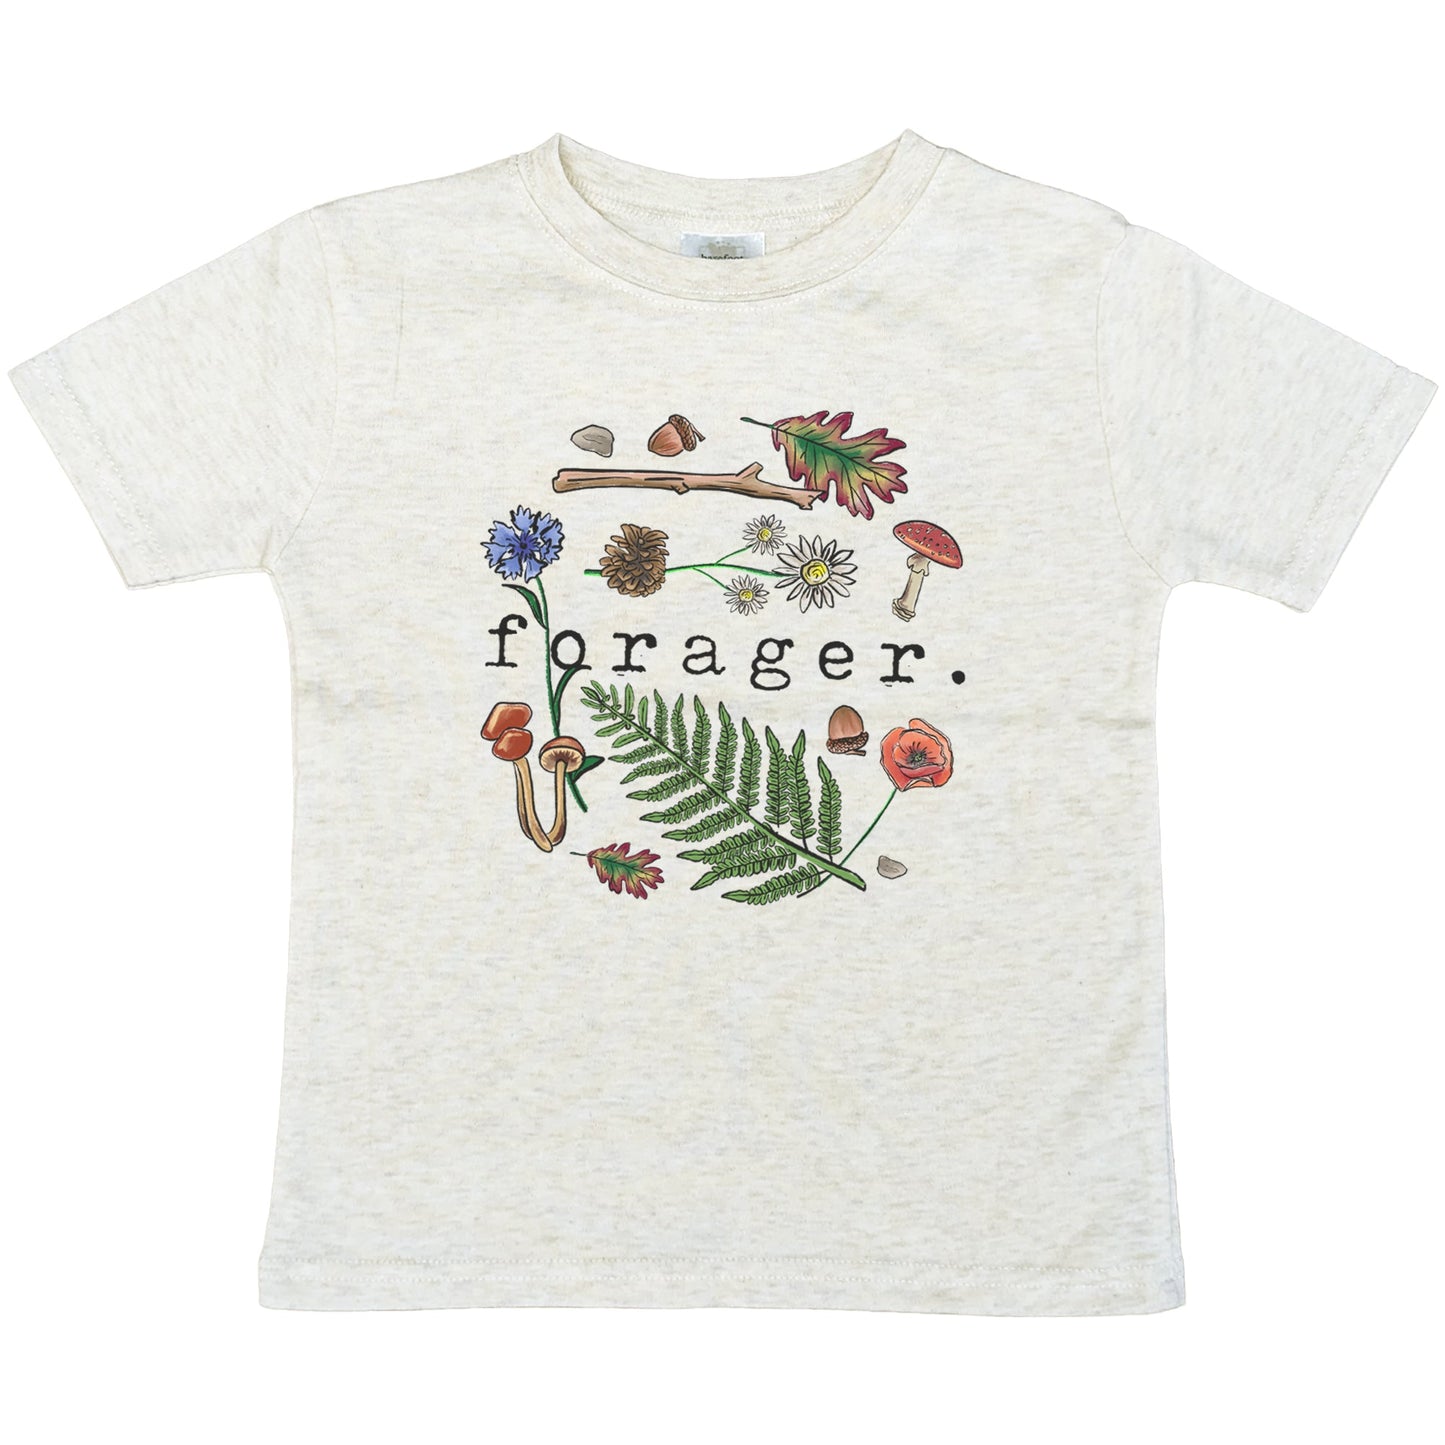 "Forager" Nature Loving Outdoor Enthusiast Design for Toddlers and Youth